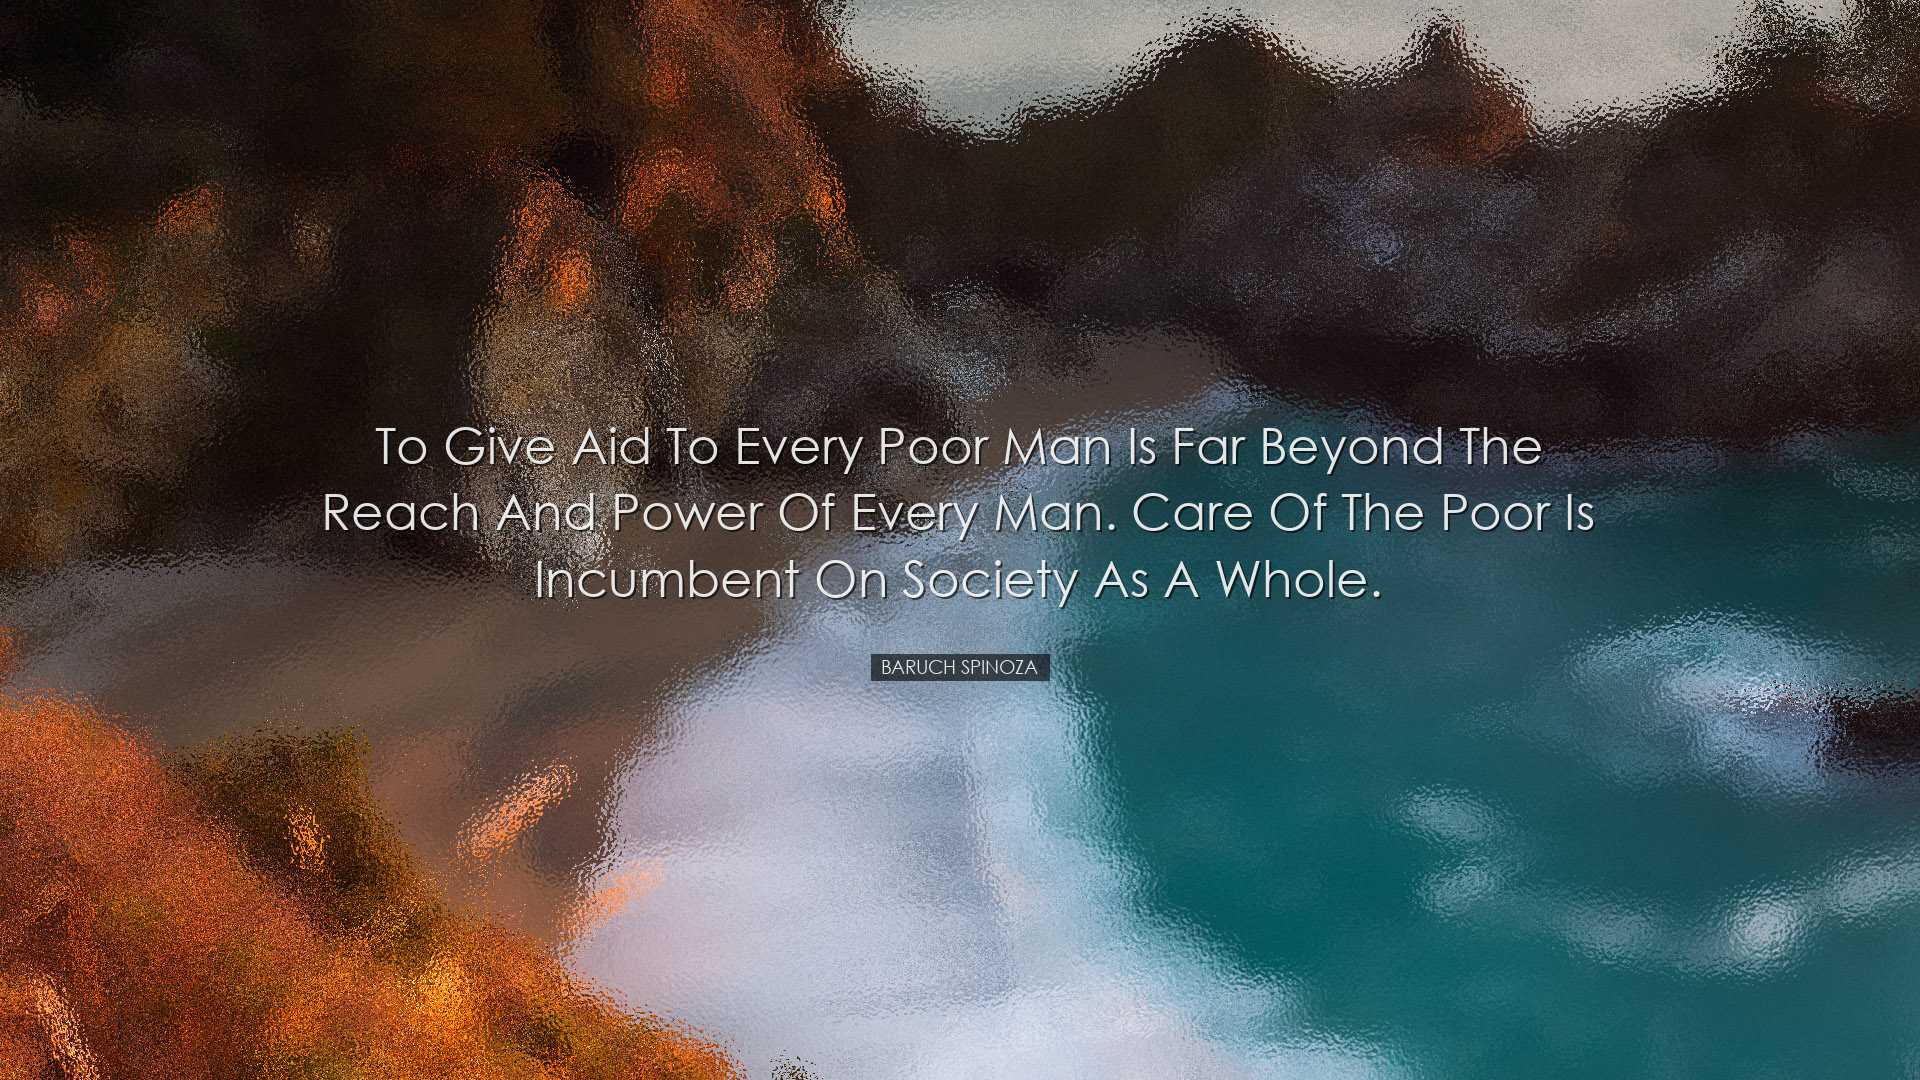 To give aid to every poor man is far beyond the reach and power of